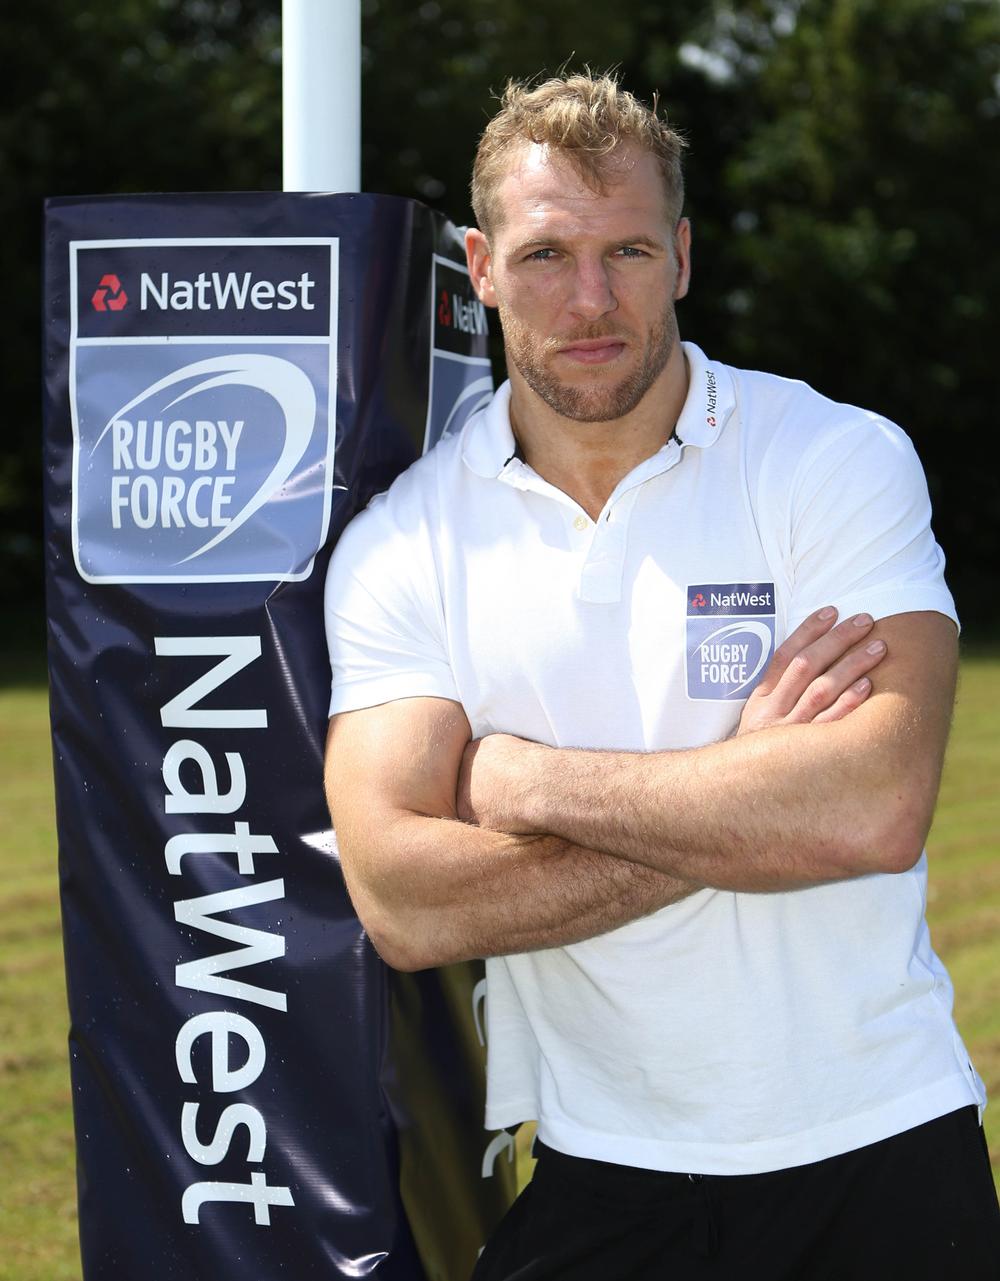 The NatWest RugbyForce – involving England stars such as James Haskell – is one of RFU’s leading partnership initiatives